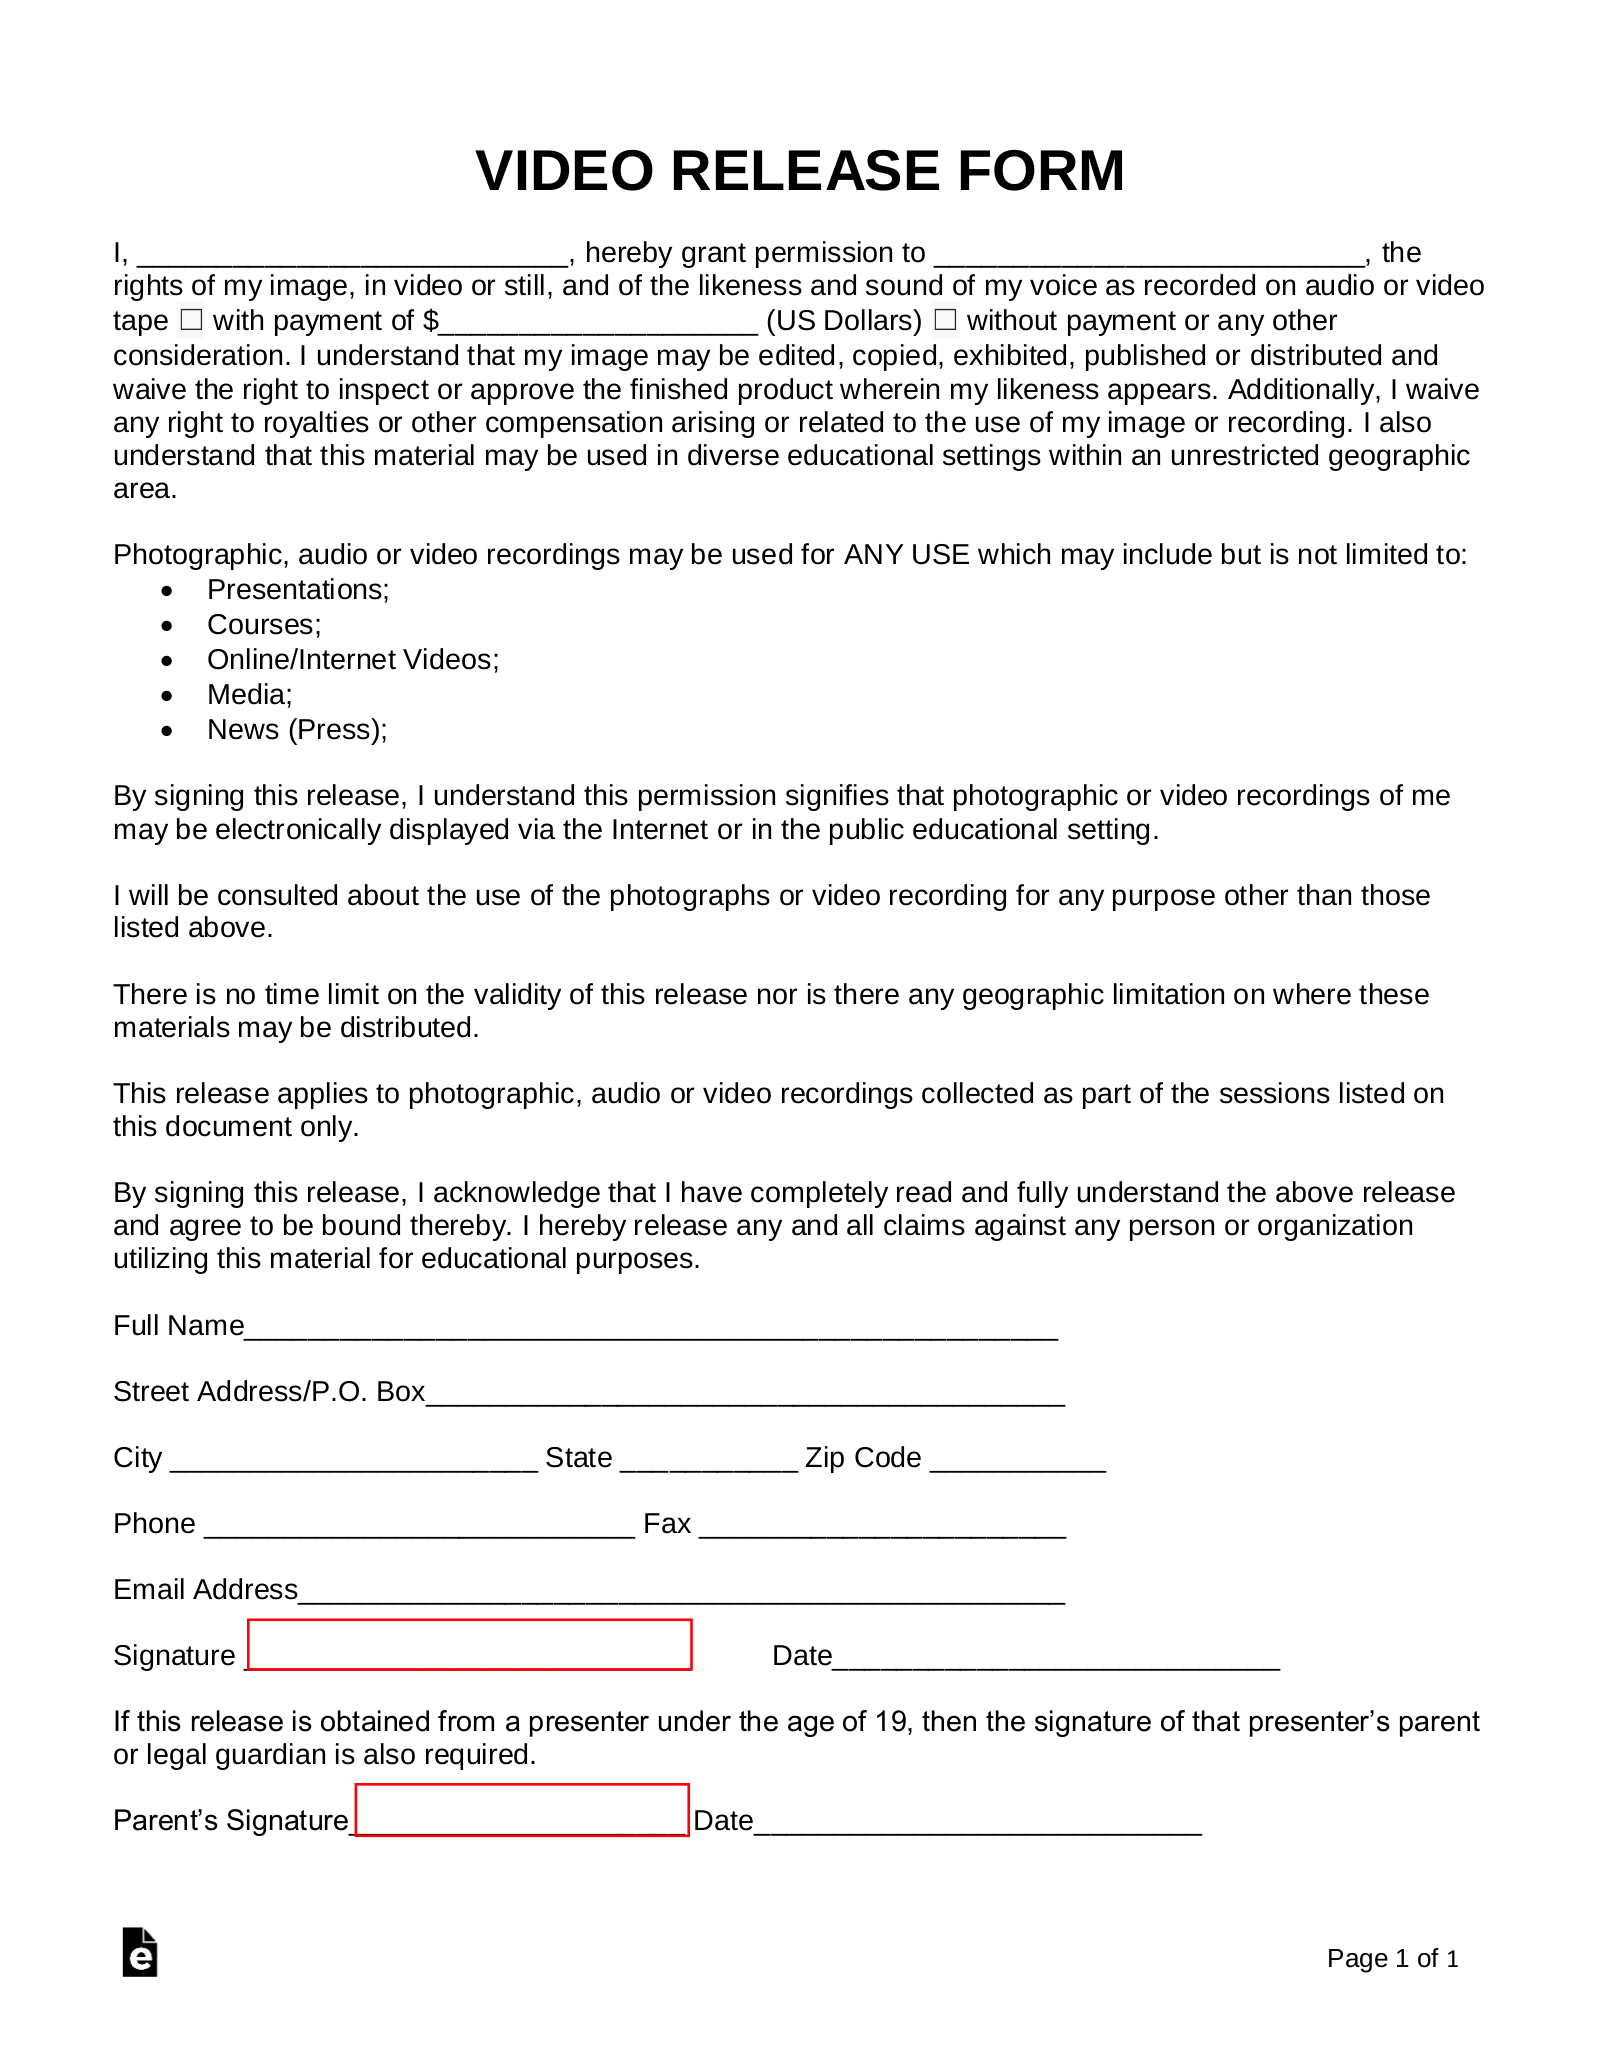 Standard Media Release Form Template from eforms.com